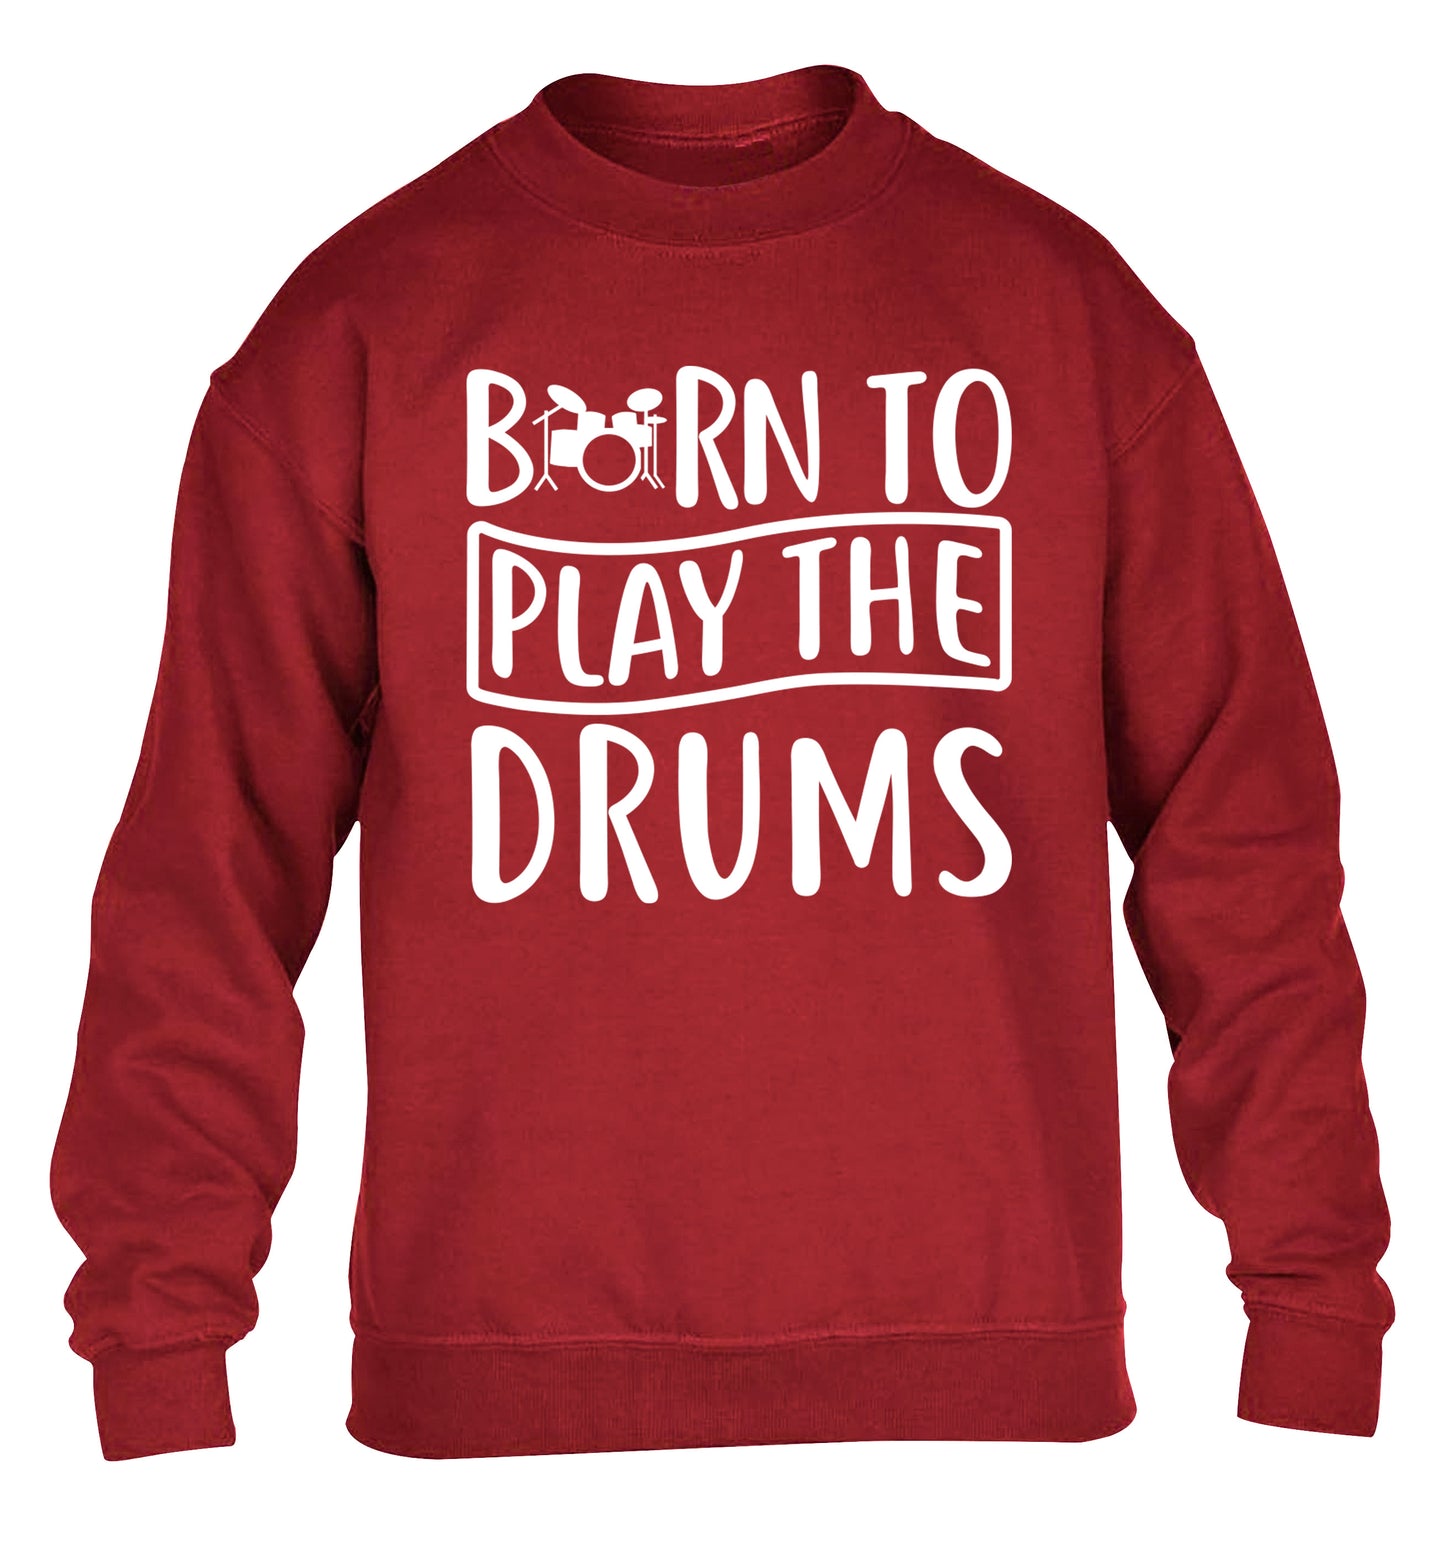 Born to play the drums children's grey sweater 12-14 Years